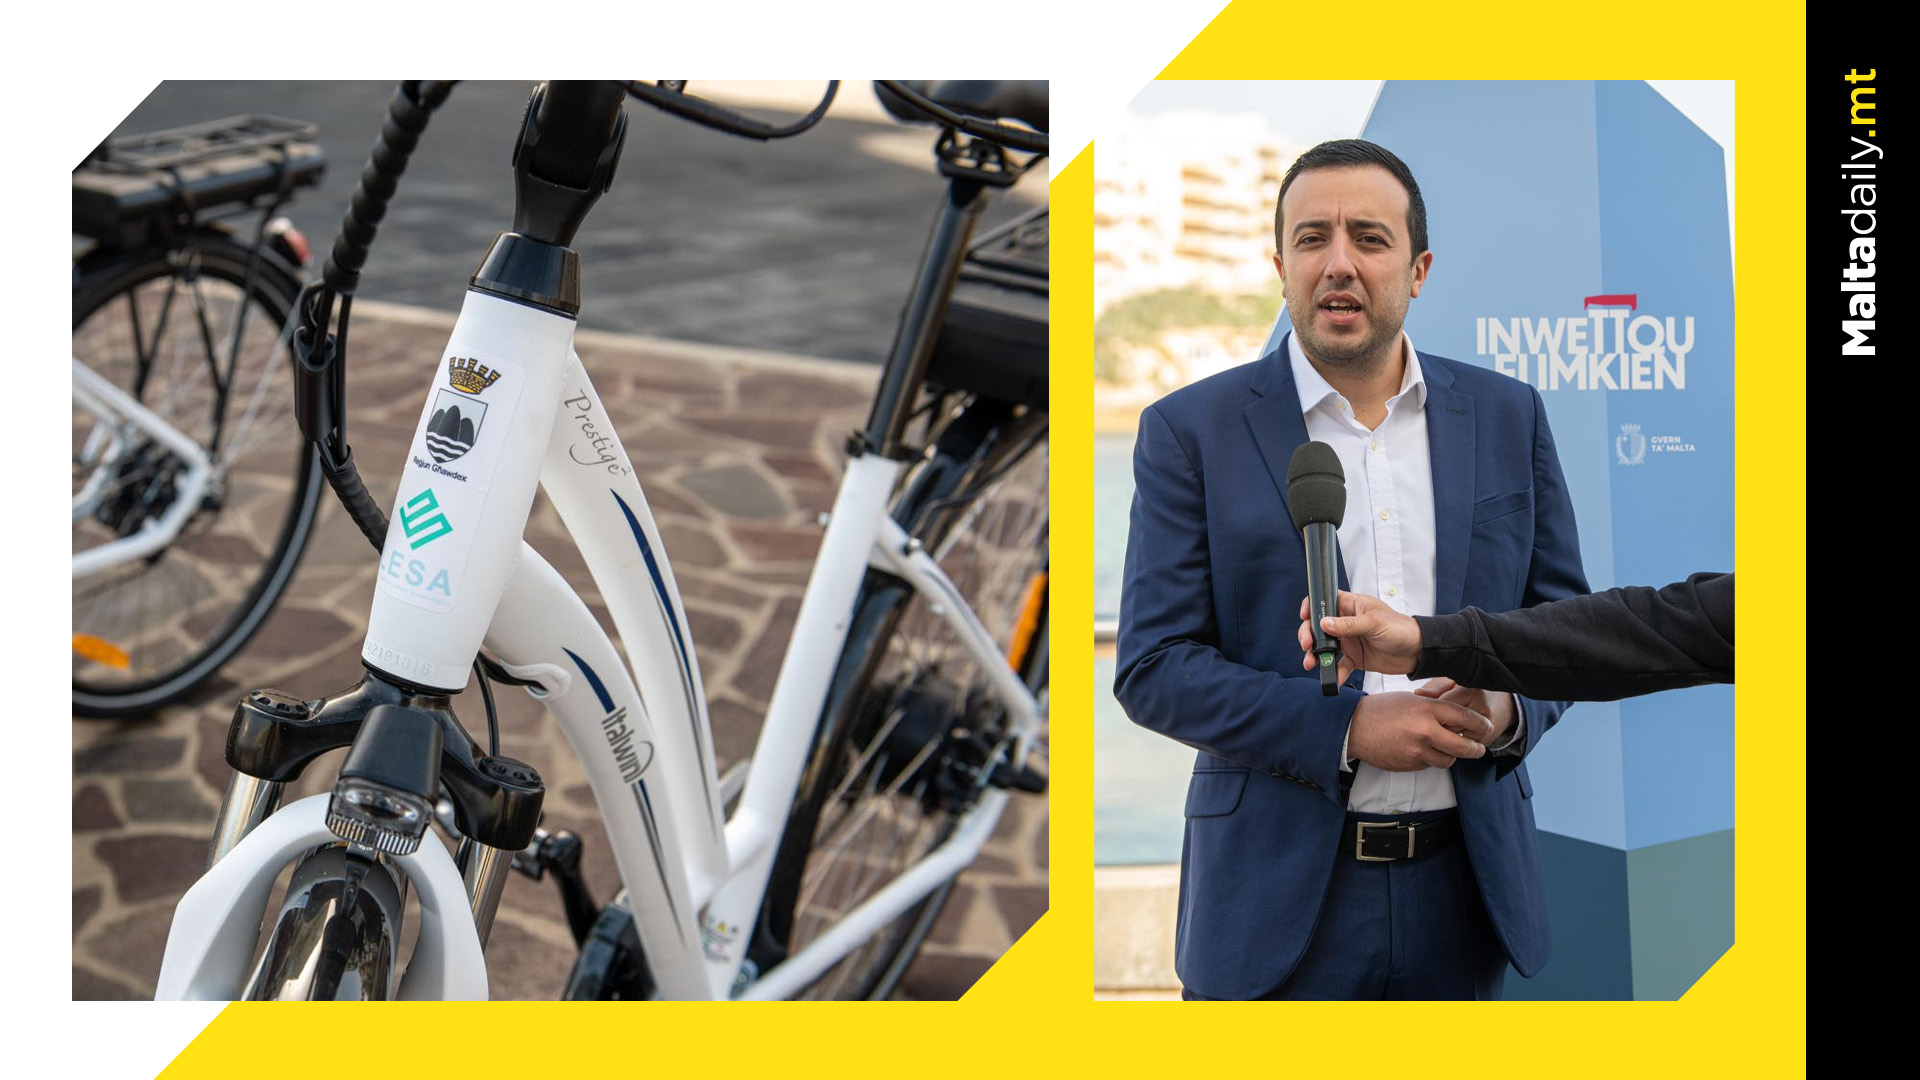 Gozo supplied with 56 new e-bikes to offer cleaner alternative transport options